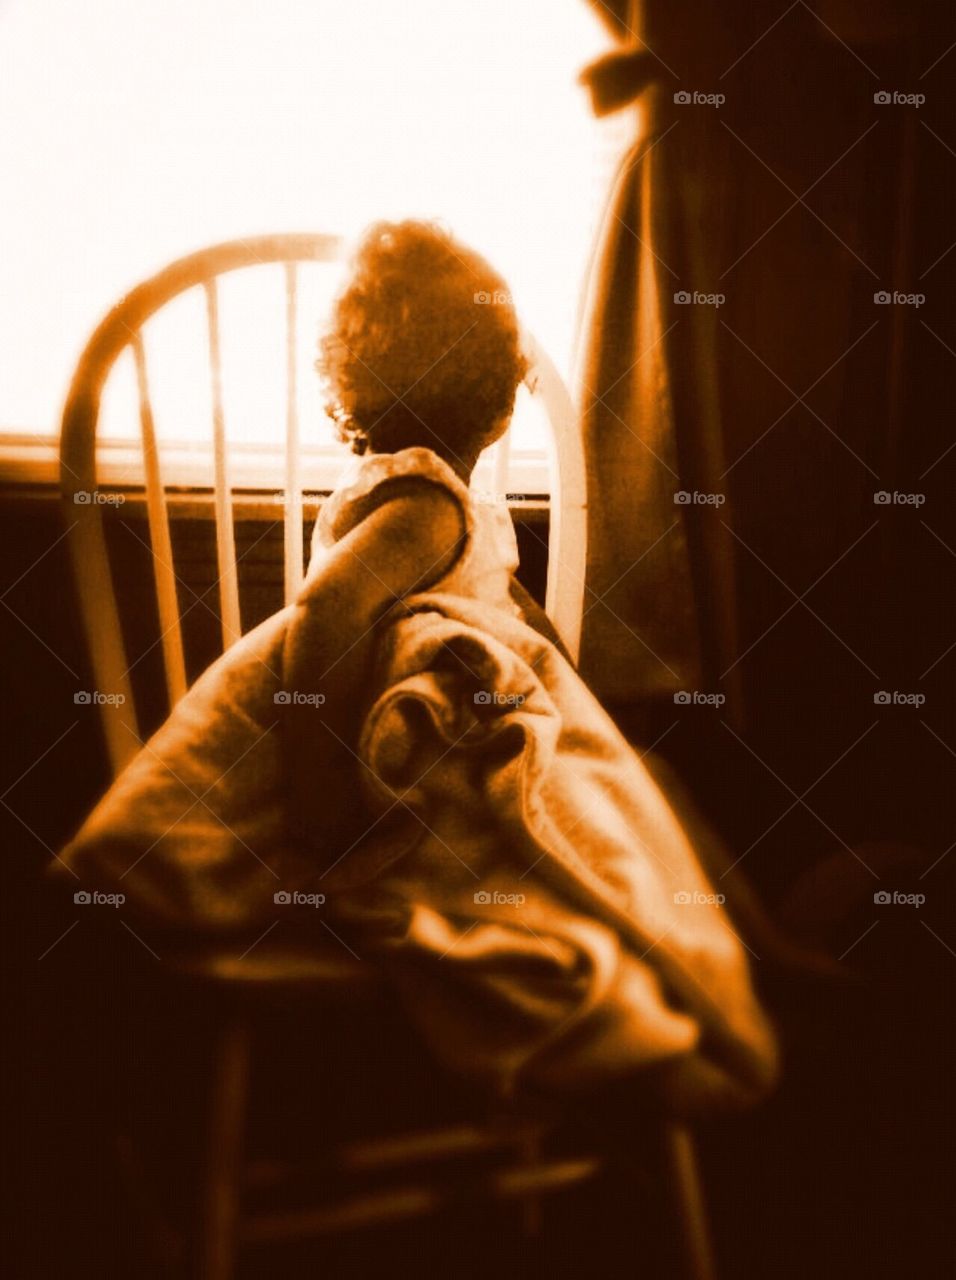 Daughter waiting for her daddy to return home